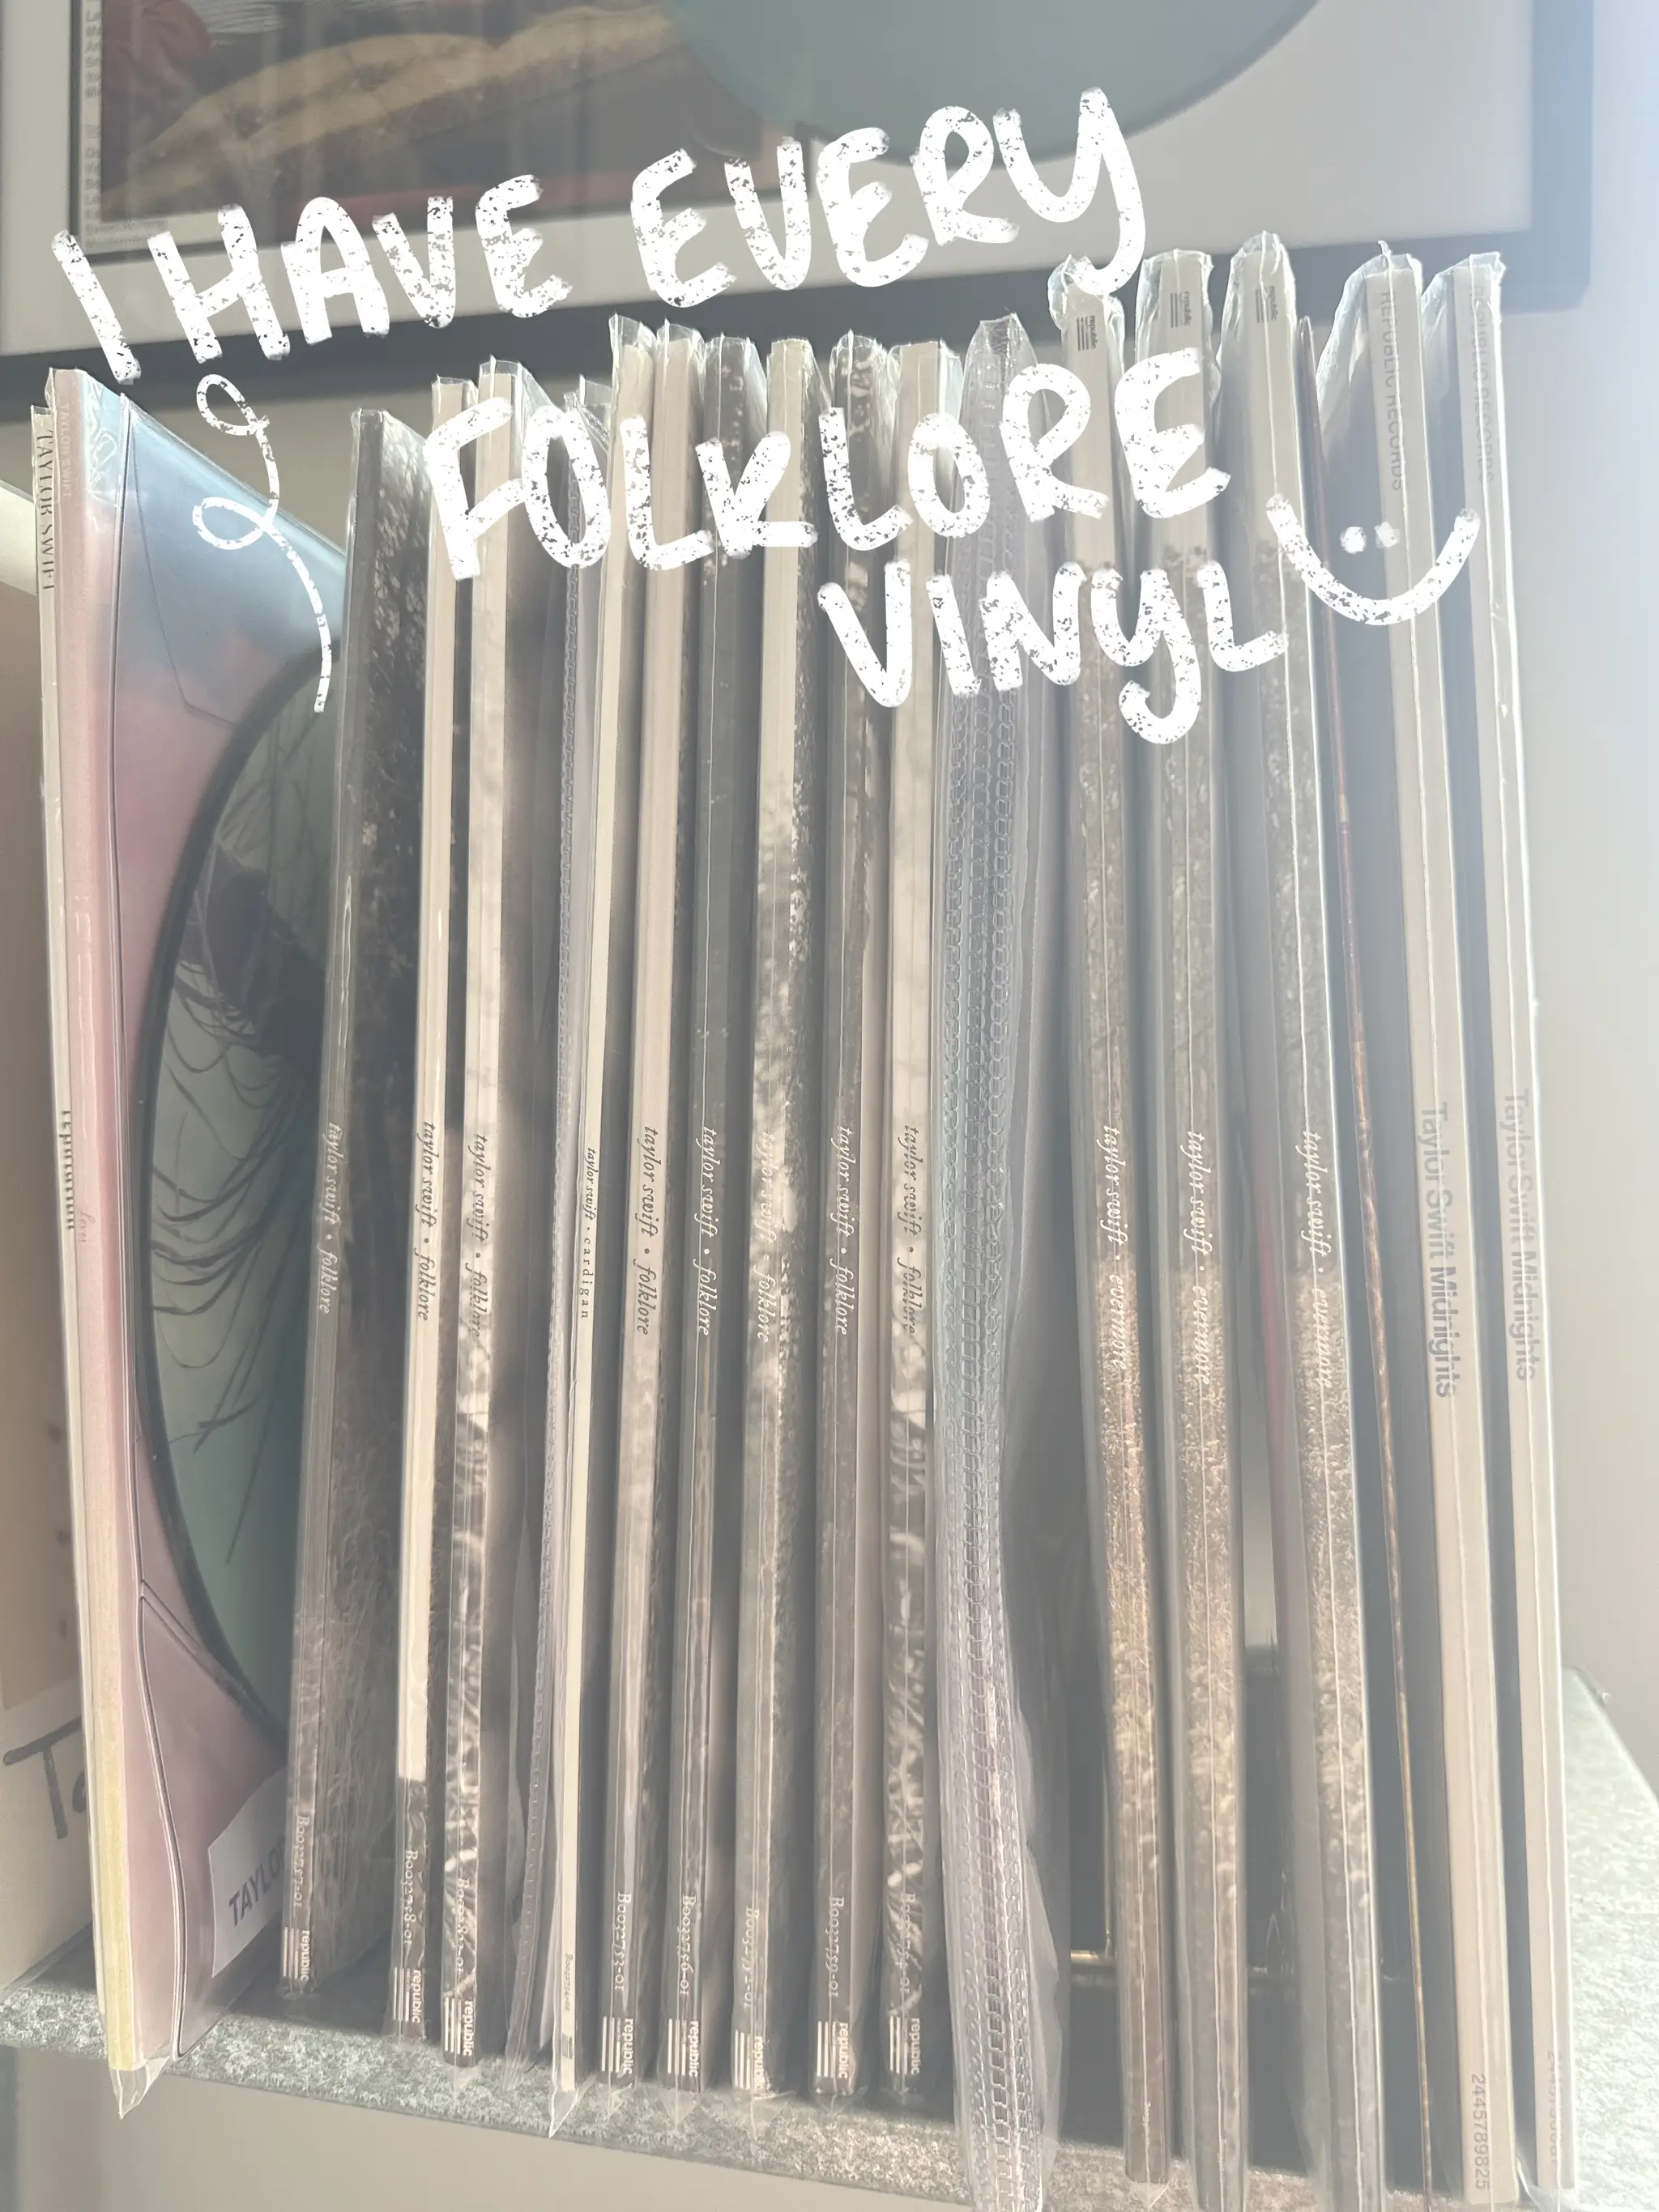 Protect your vinyl records with inner and outer sleeves. Just another , taylor swift vinyl